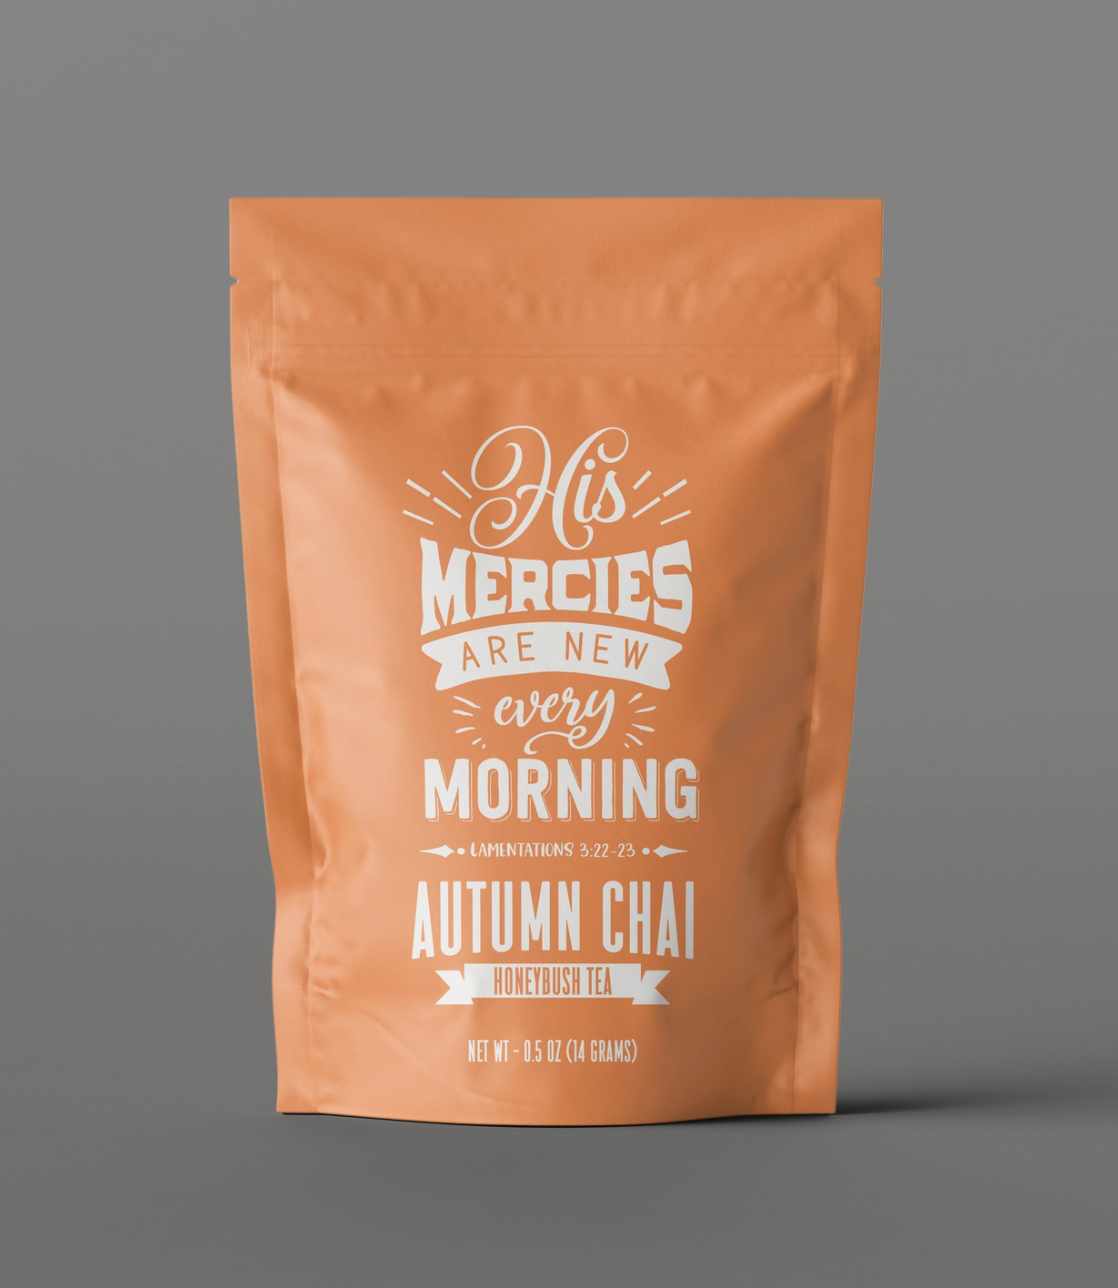 "His Mercies Are New Every Morning" - Autumn Chai Tea